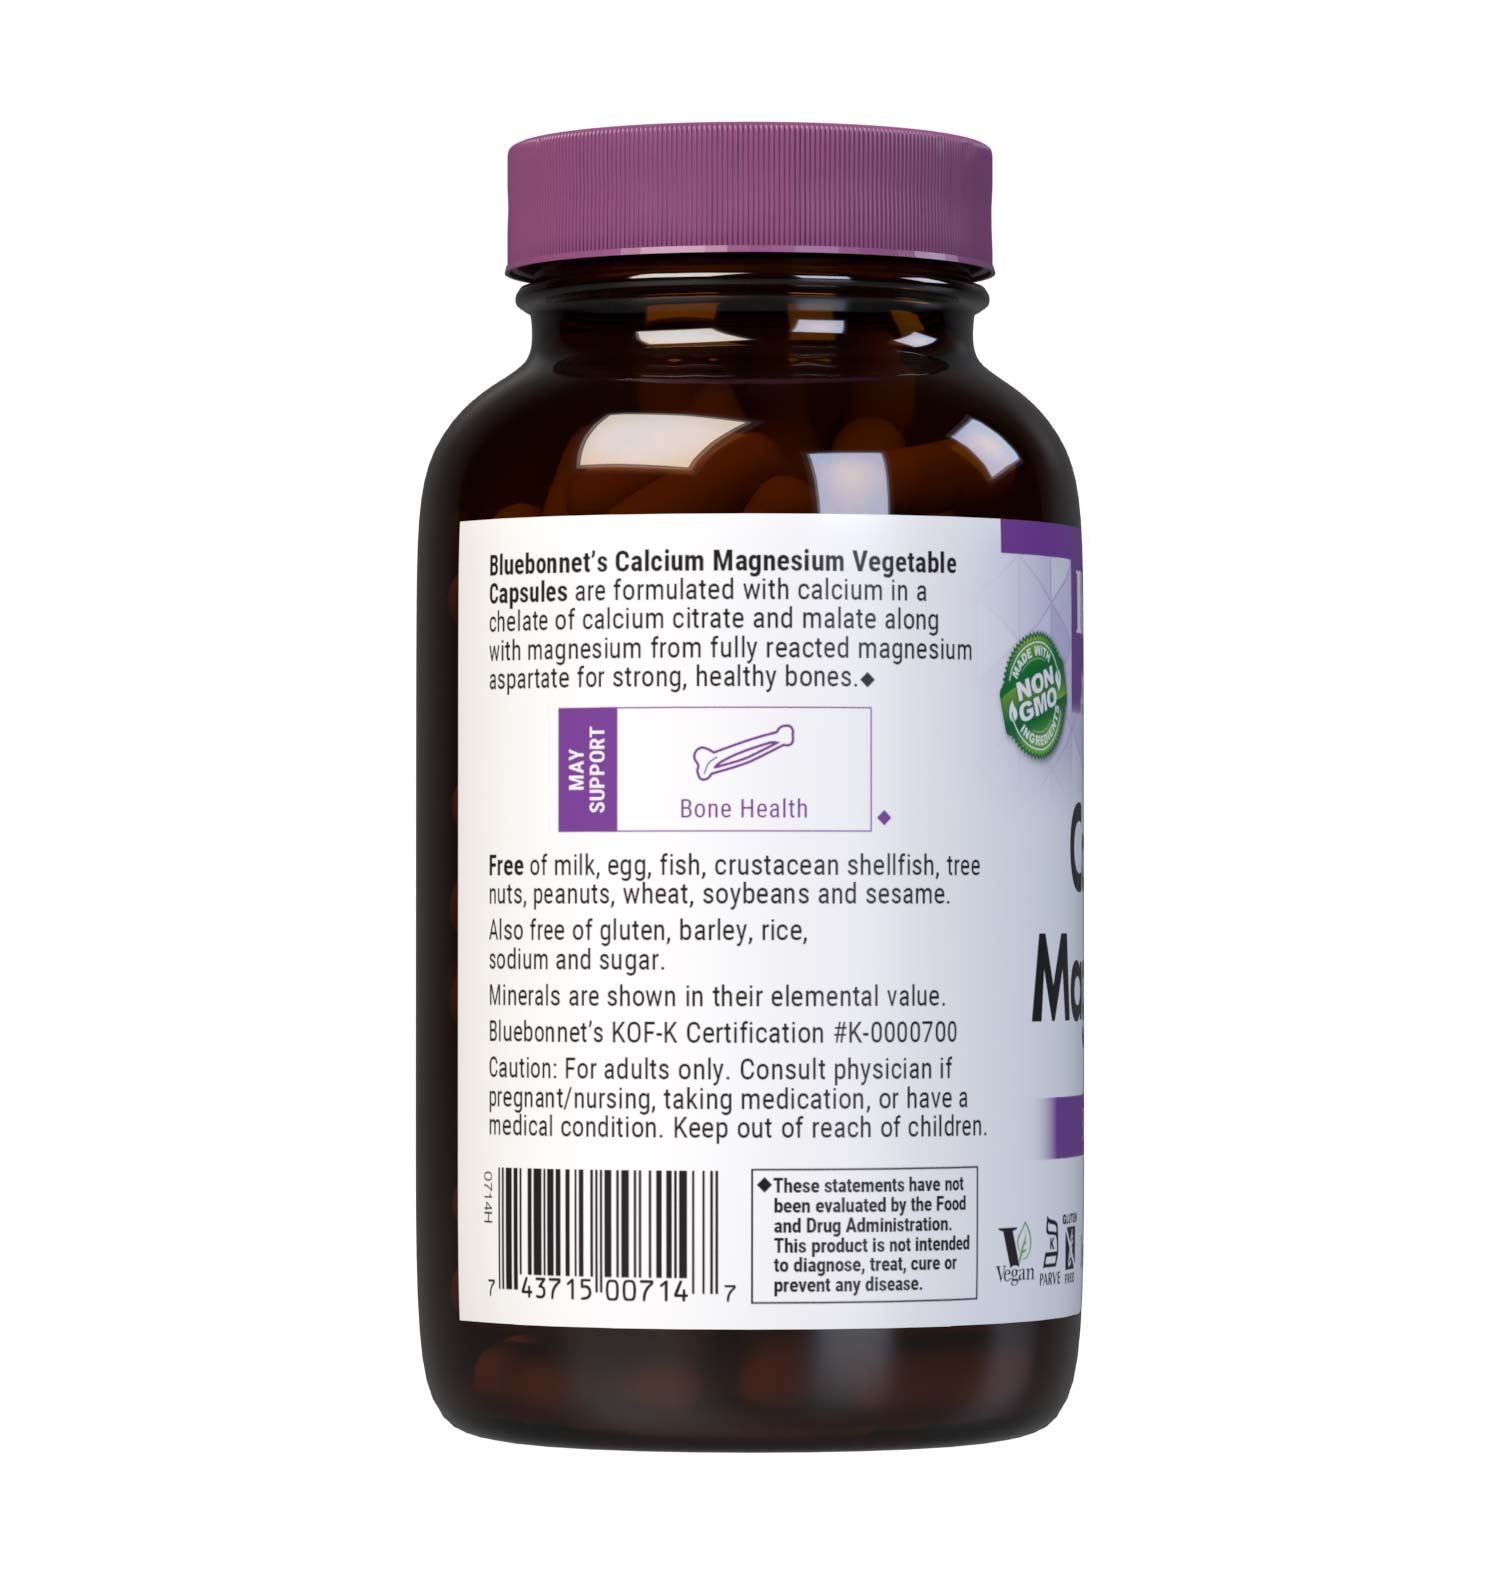 Bluebonnet's Calcium & Magnesium 180 Vegetable Capsules are formulated with calcium in a chelate of calcium citrate and malate, plus magnesium from fully reacted magnesium aspartate for strong, healthy bones. Description panel. #size_180 count